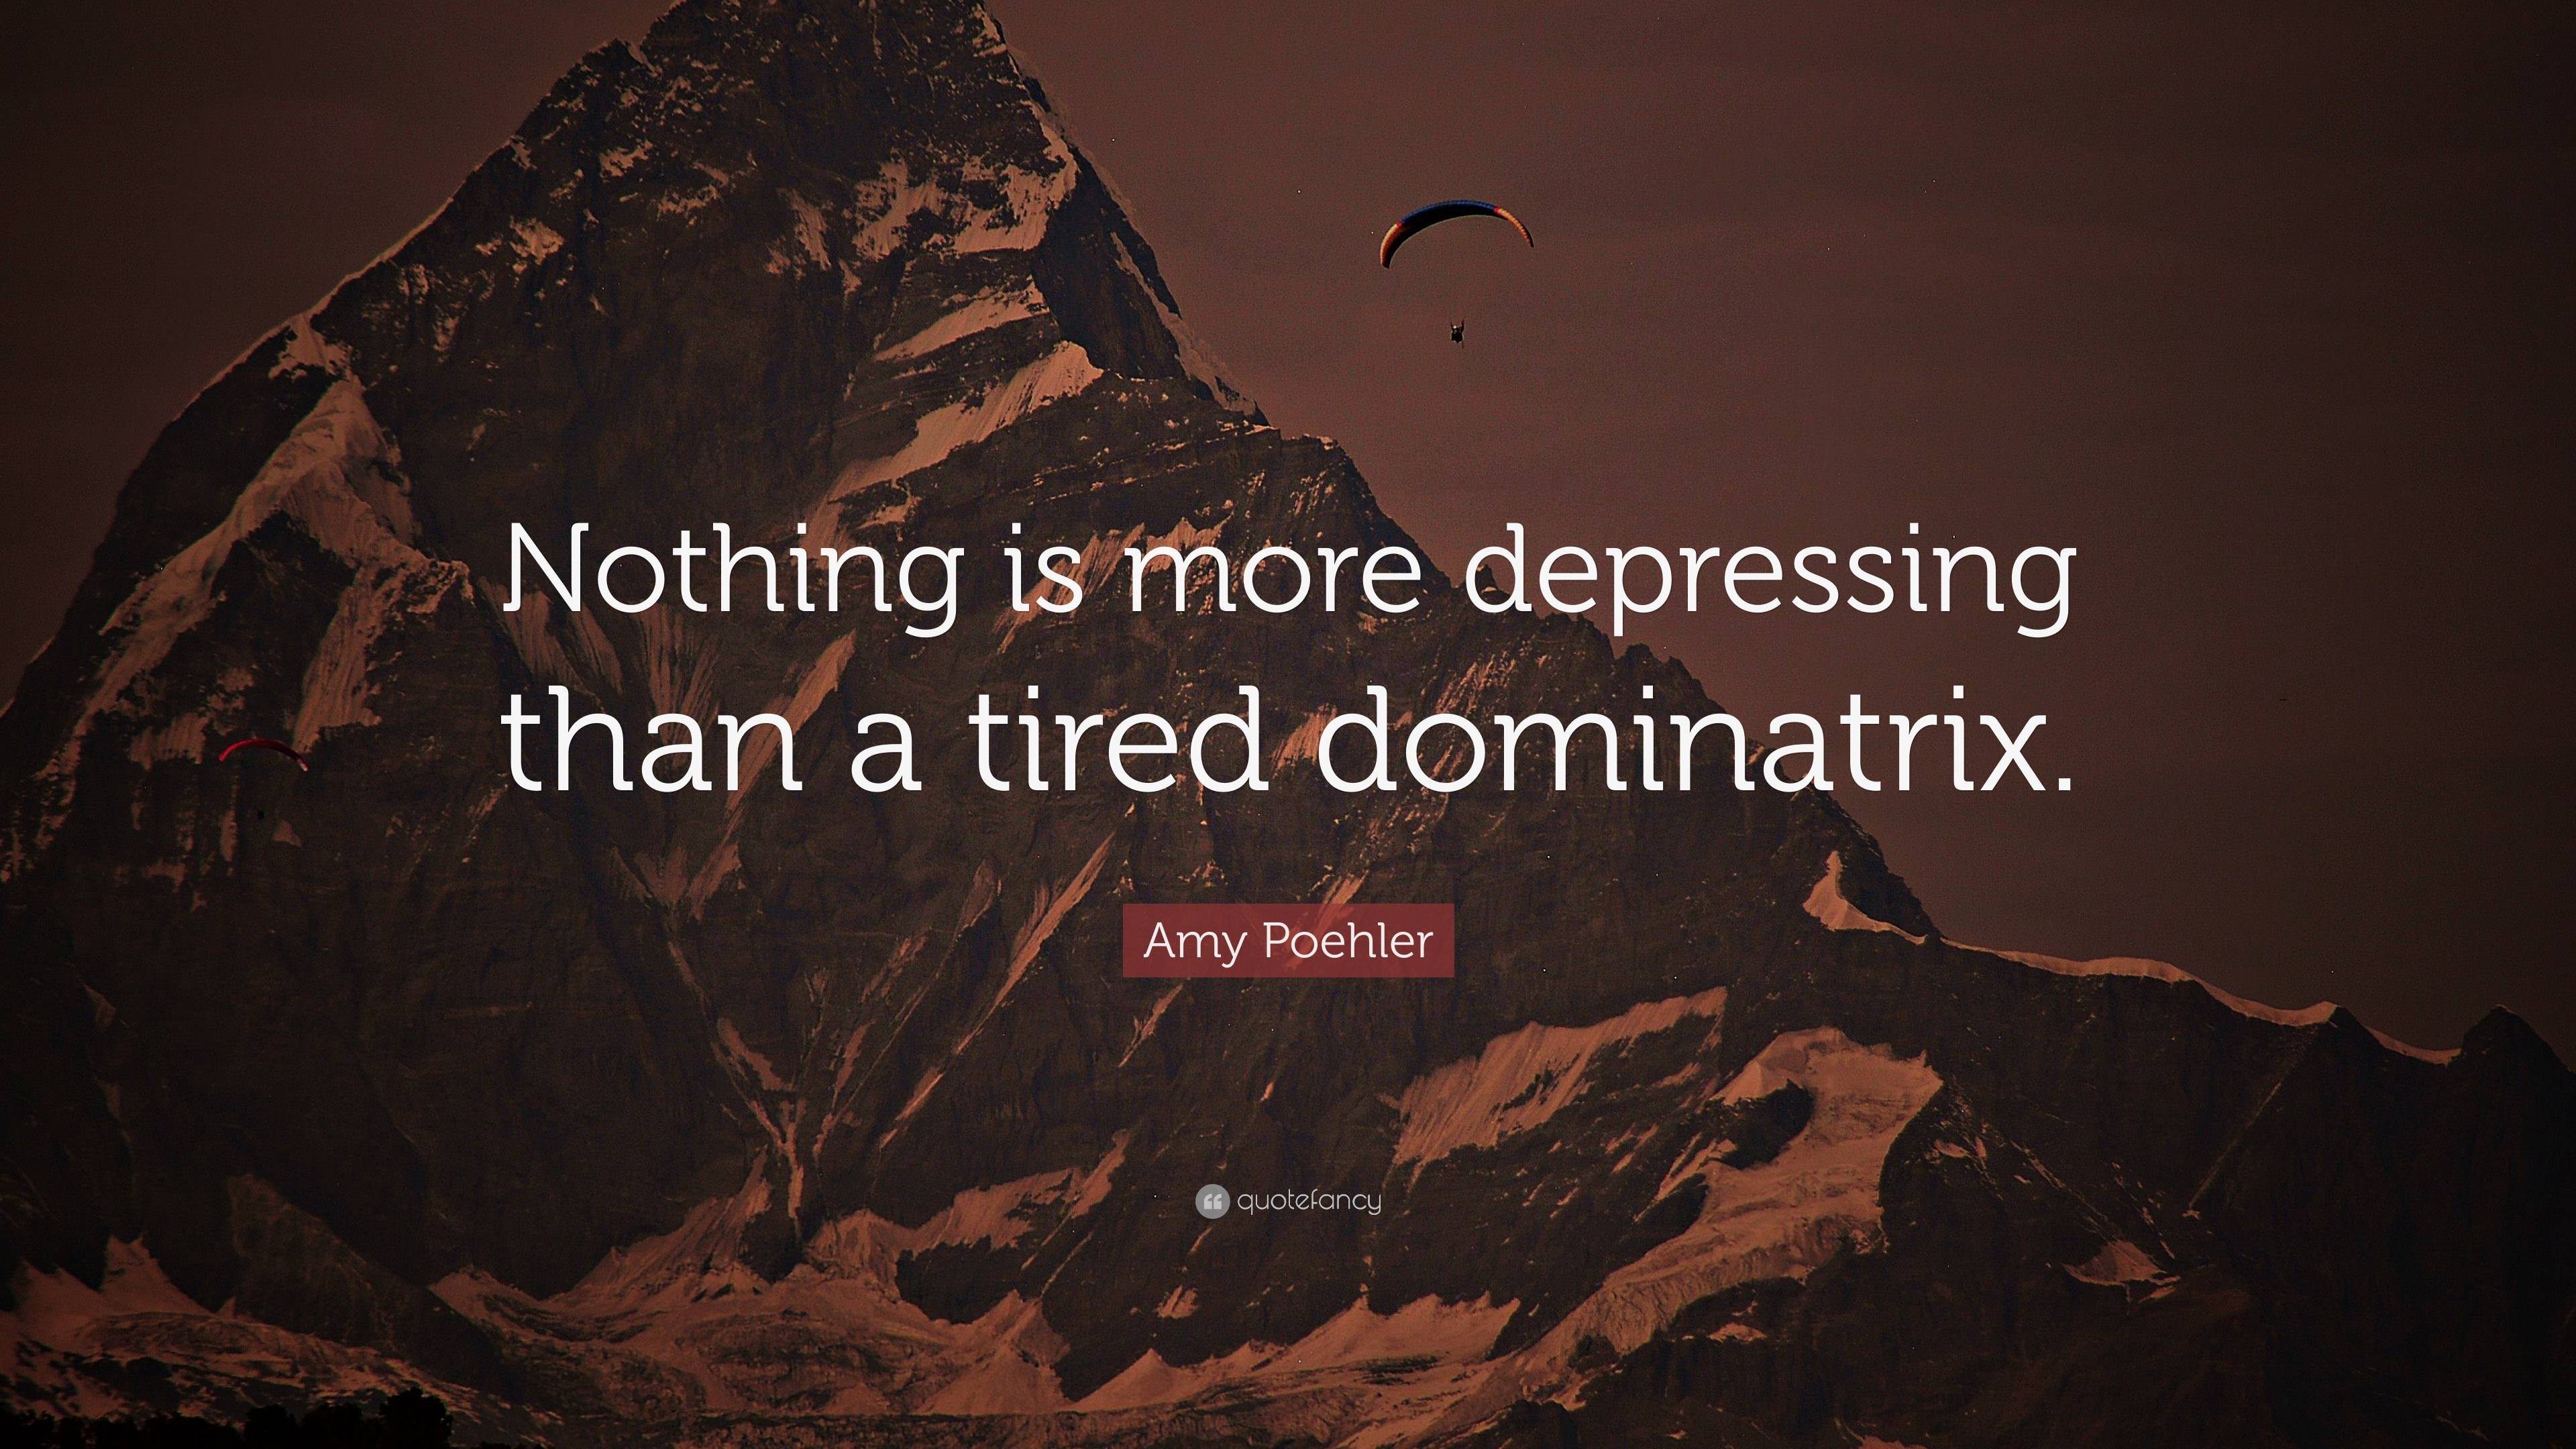 Amy Poehler Quote “nothing Is More Depressing Than A Tired Dominatrix” 7525